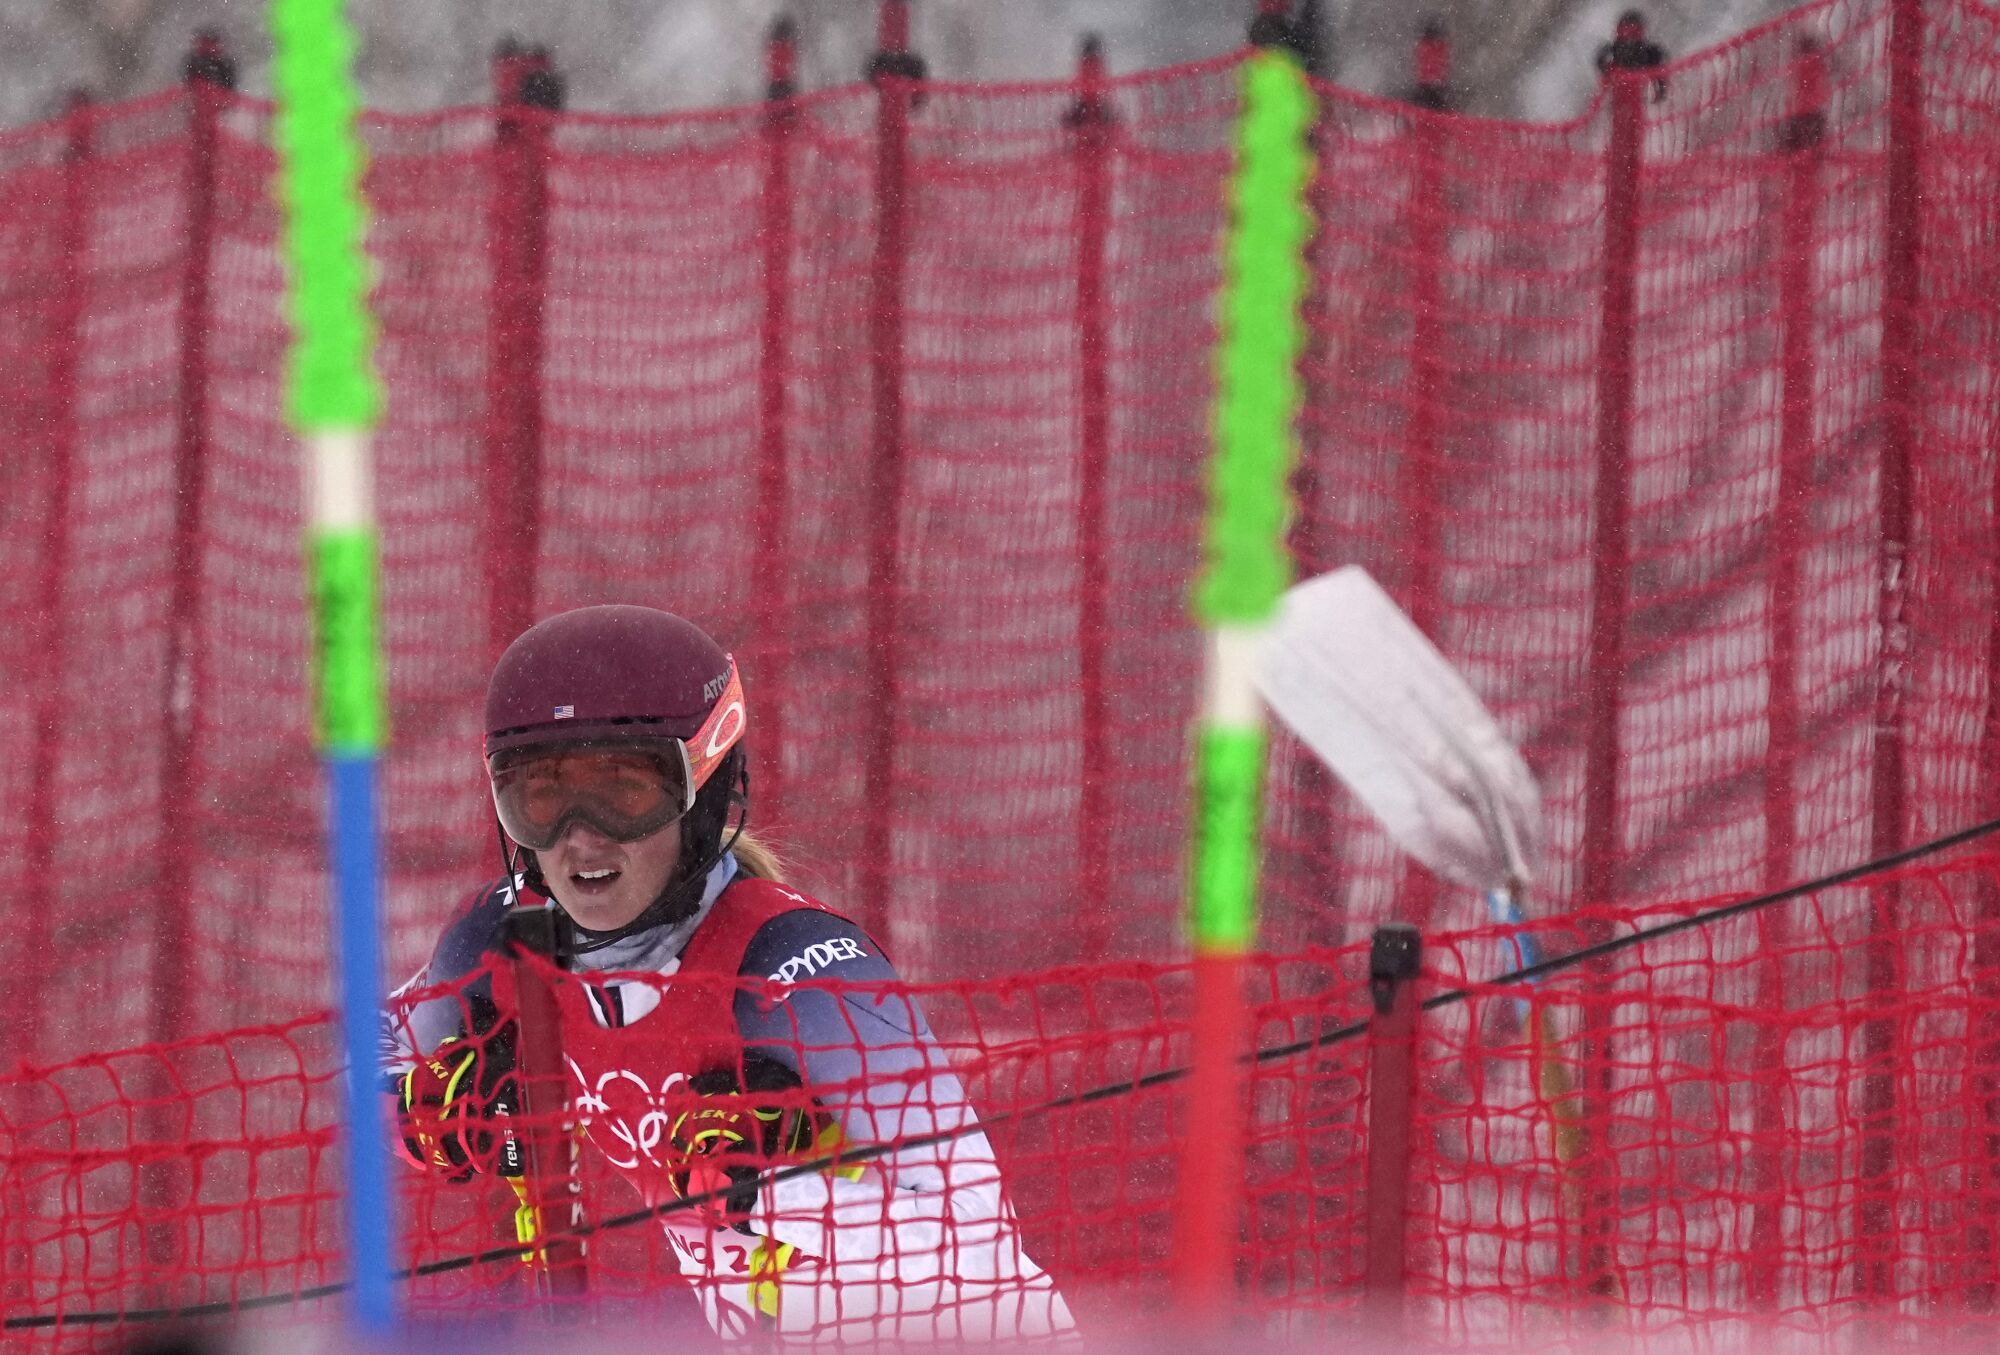 Mikaela Shiffrin stands on the side of the course after crashing out during the women's combined slalom.